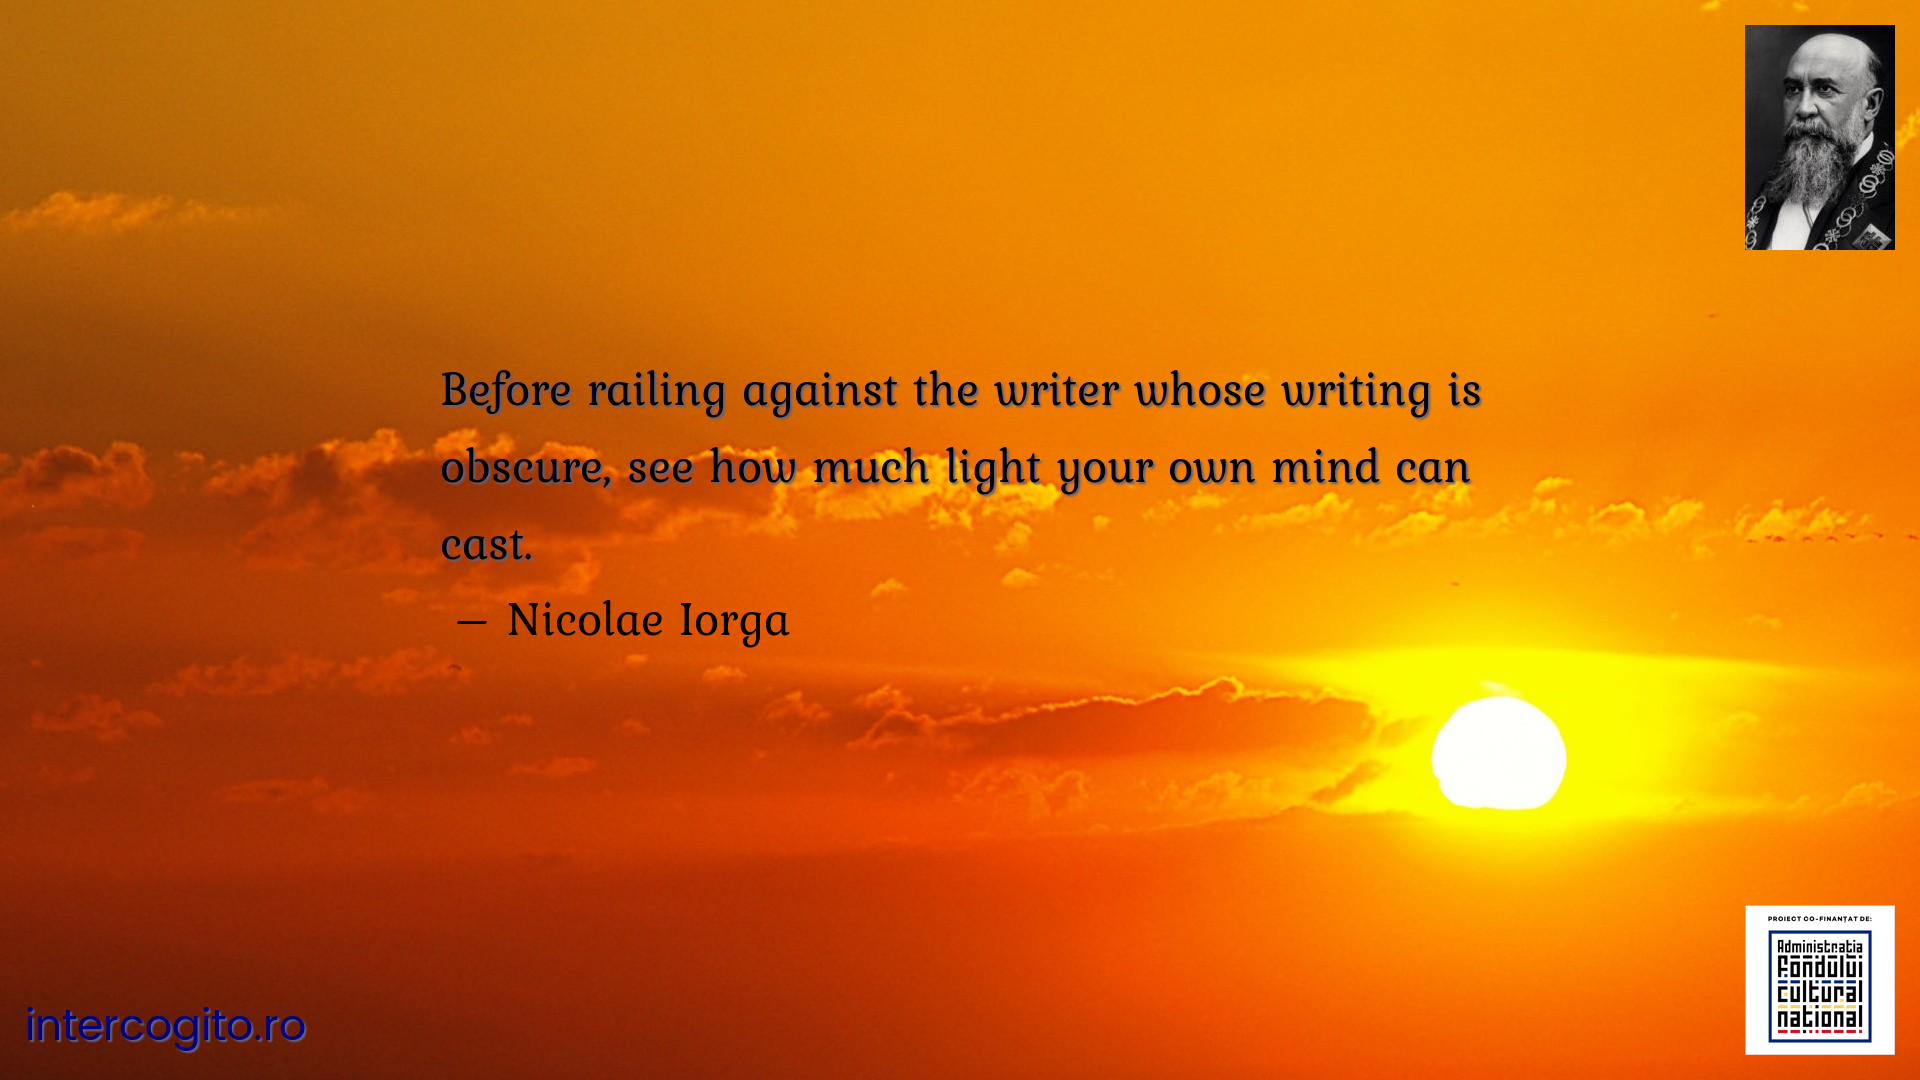 Before railing against the writer whose writing is obscure, see how much light your own mind can cast.